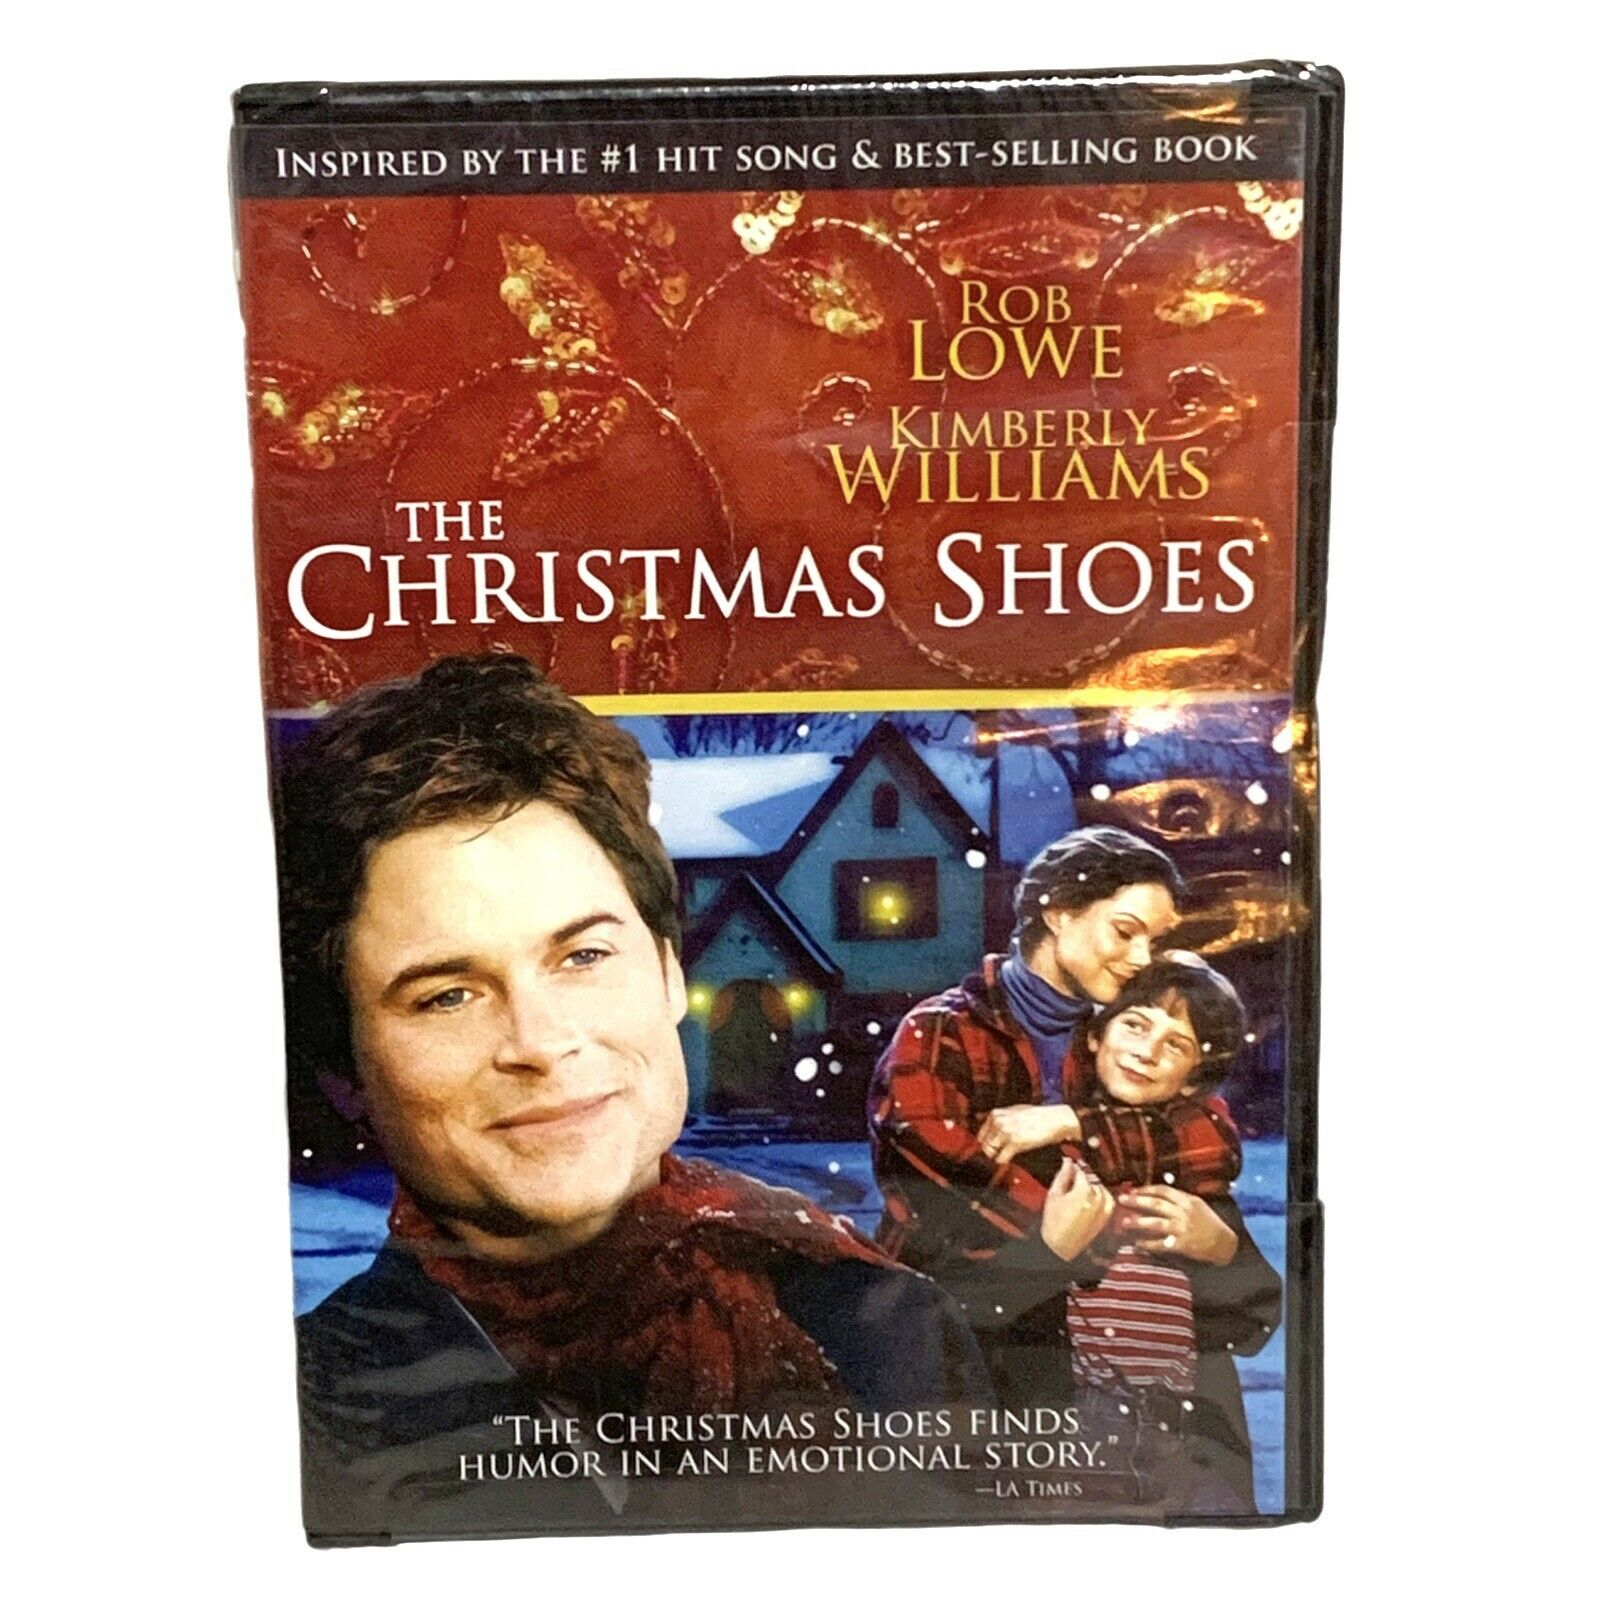 The Christmas Shoes (DVD, 2002) Rob Lowe Kimberly Williams New Sealed